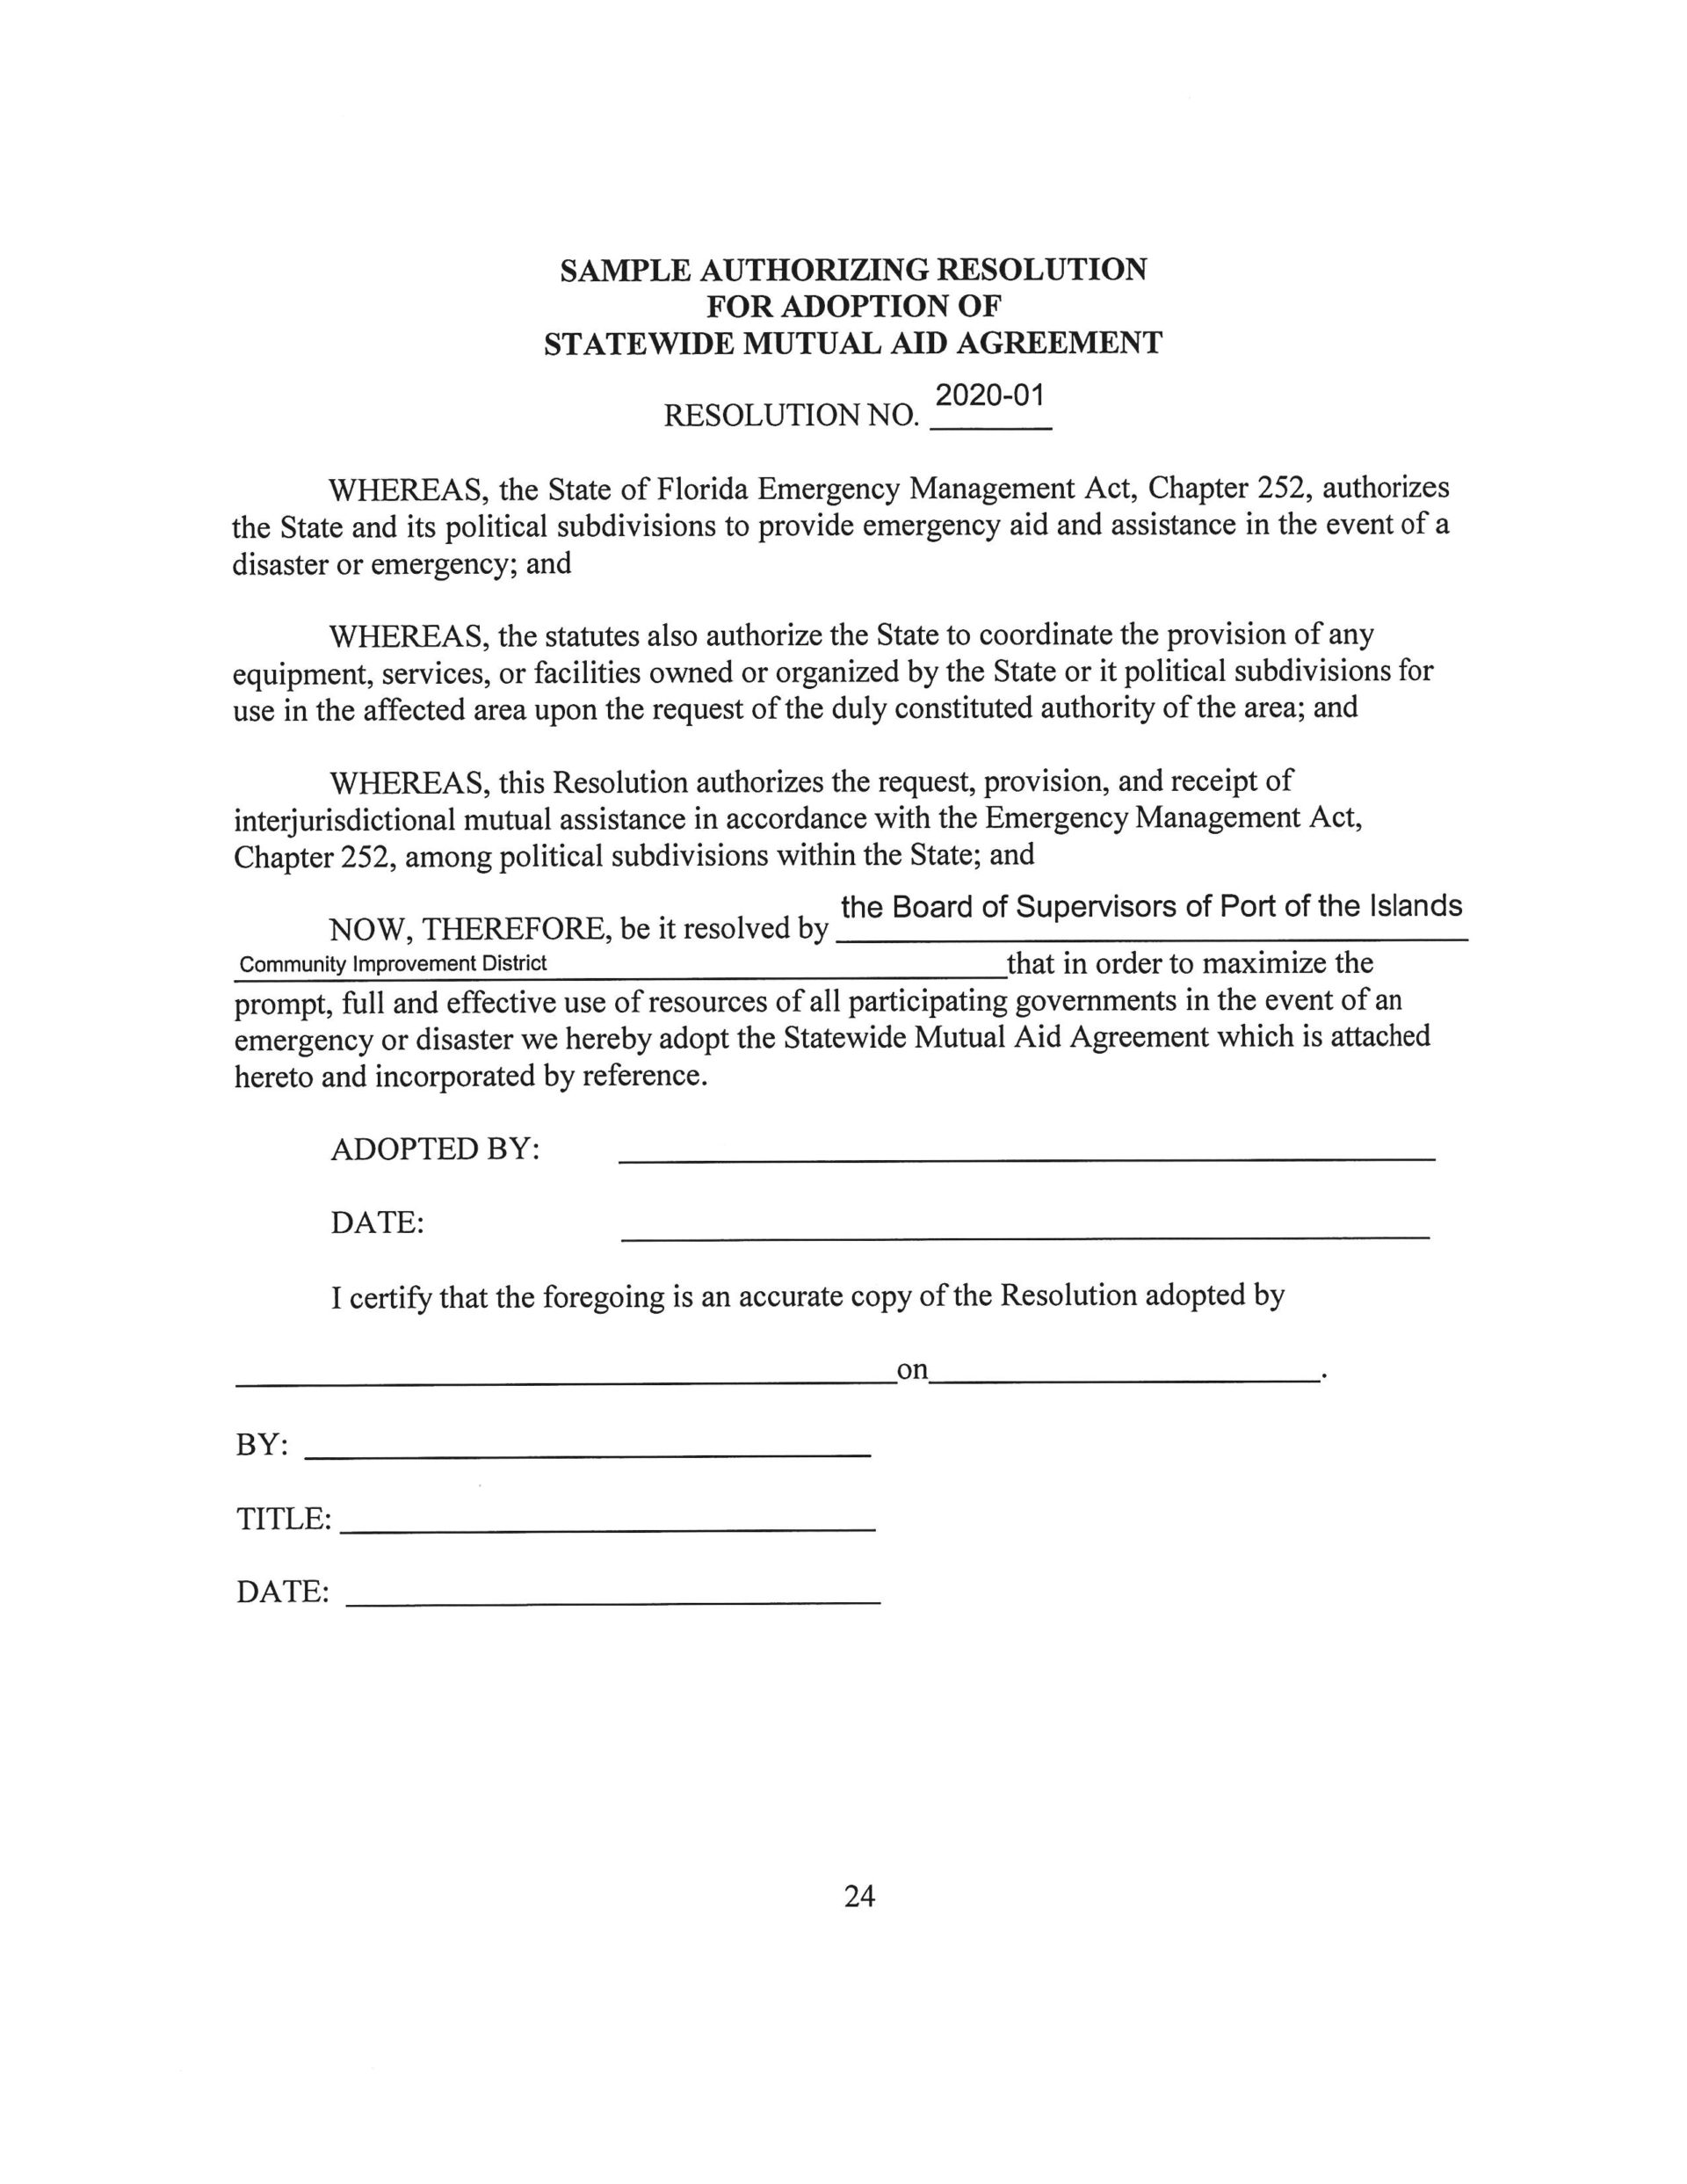 Statewide mutual aid agreement signature page